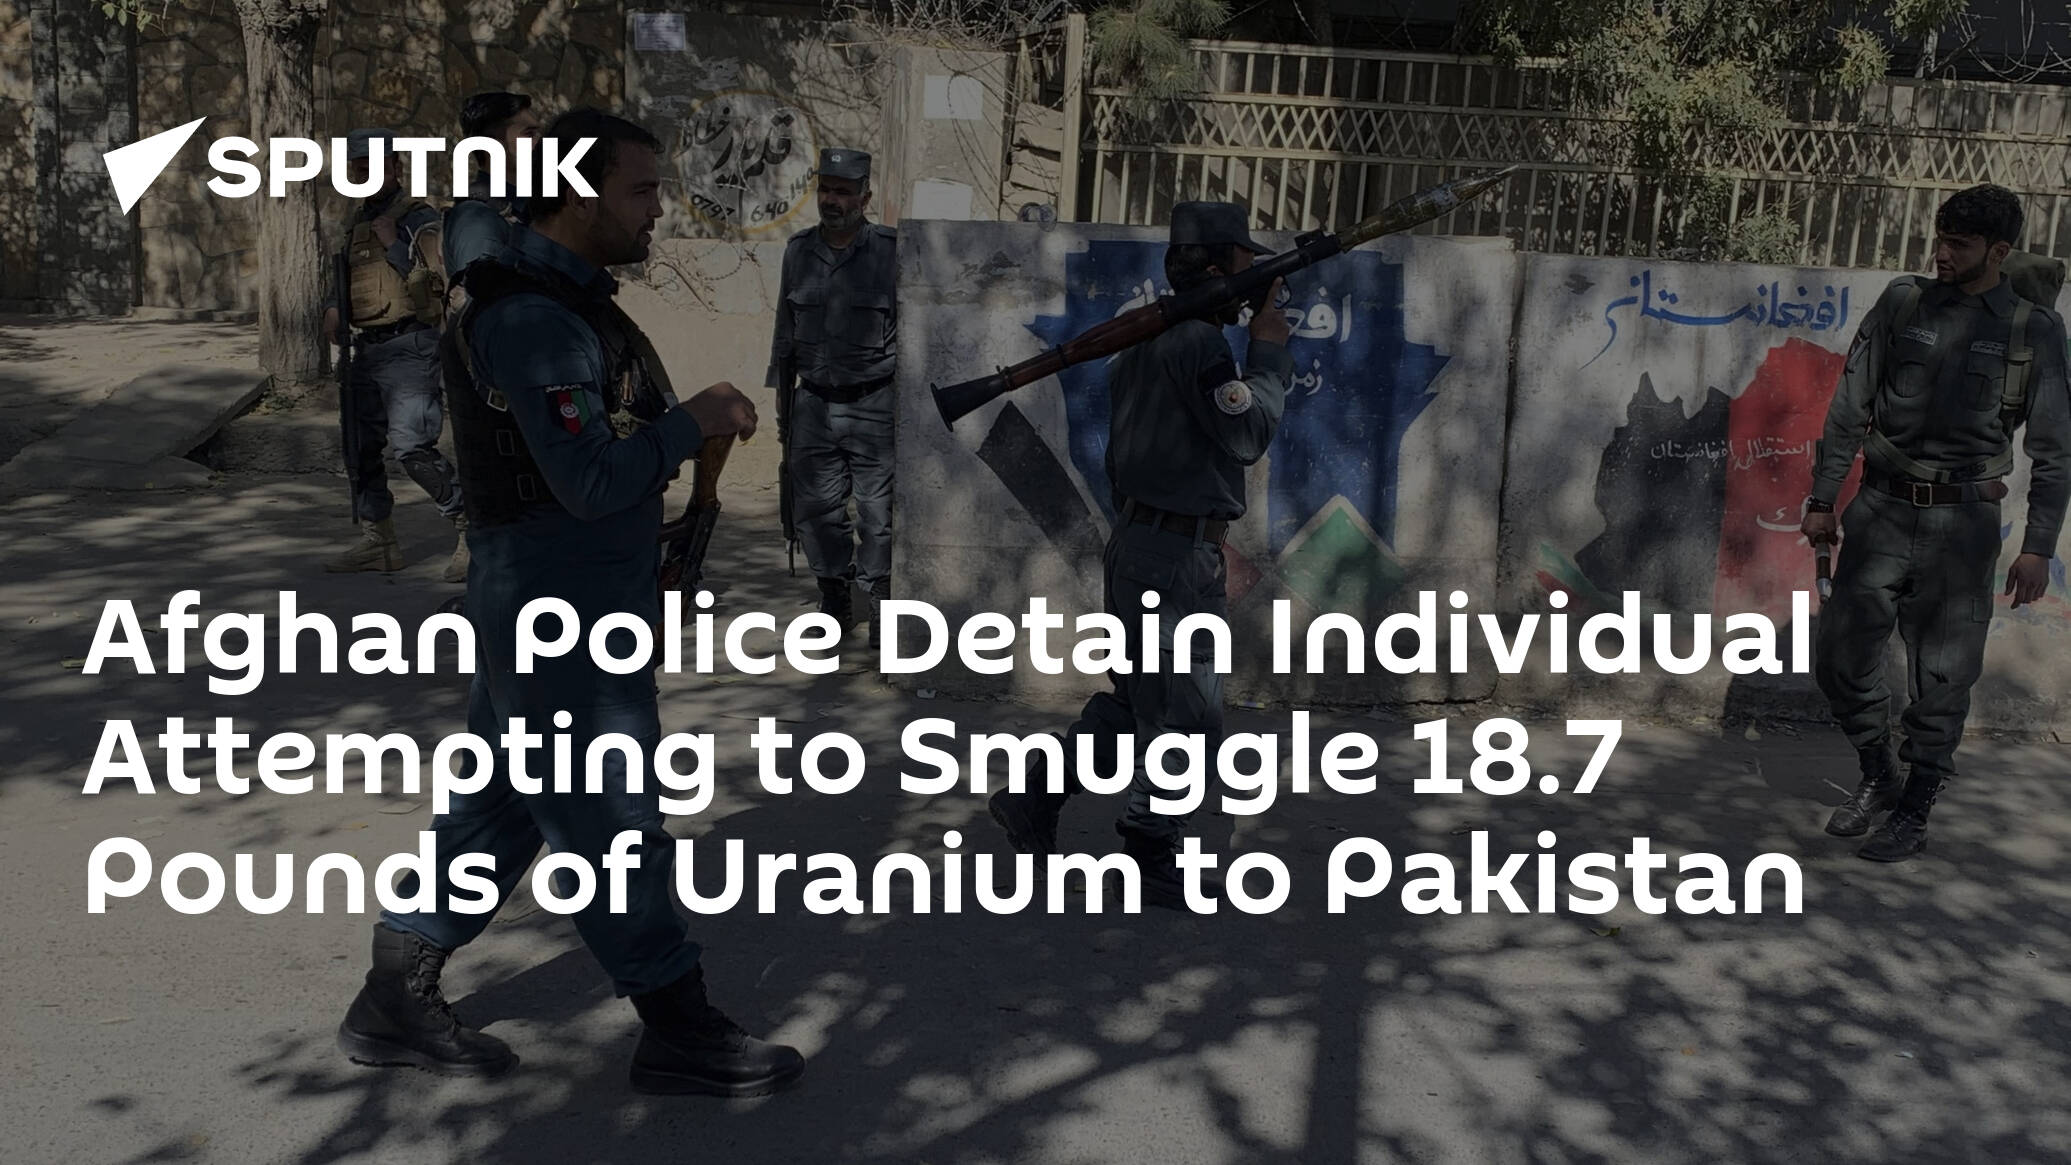 Afghan Police Detain Individual Attempting to Smuggle 18.7 Pounds of Uranium to Pakistan